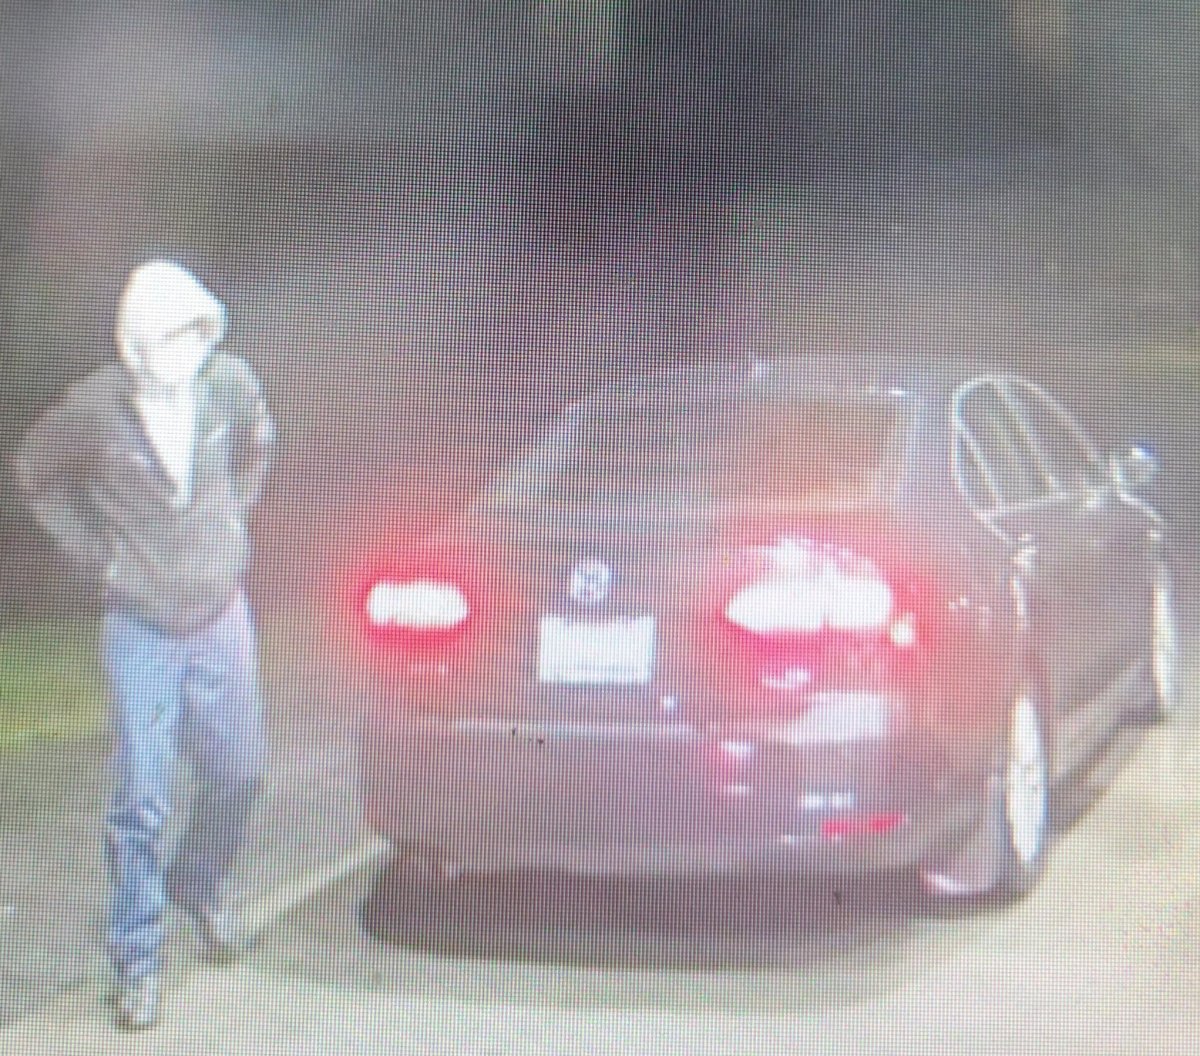 Peterborough County OPP are investigating the theft of a vehicle from Havelock-Belmont-Methuen Township.